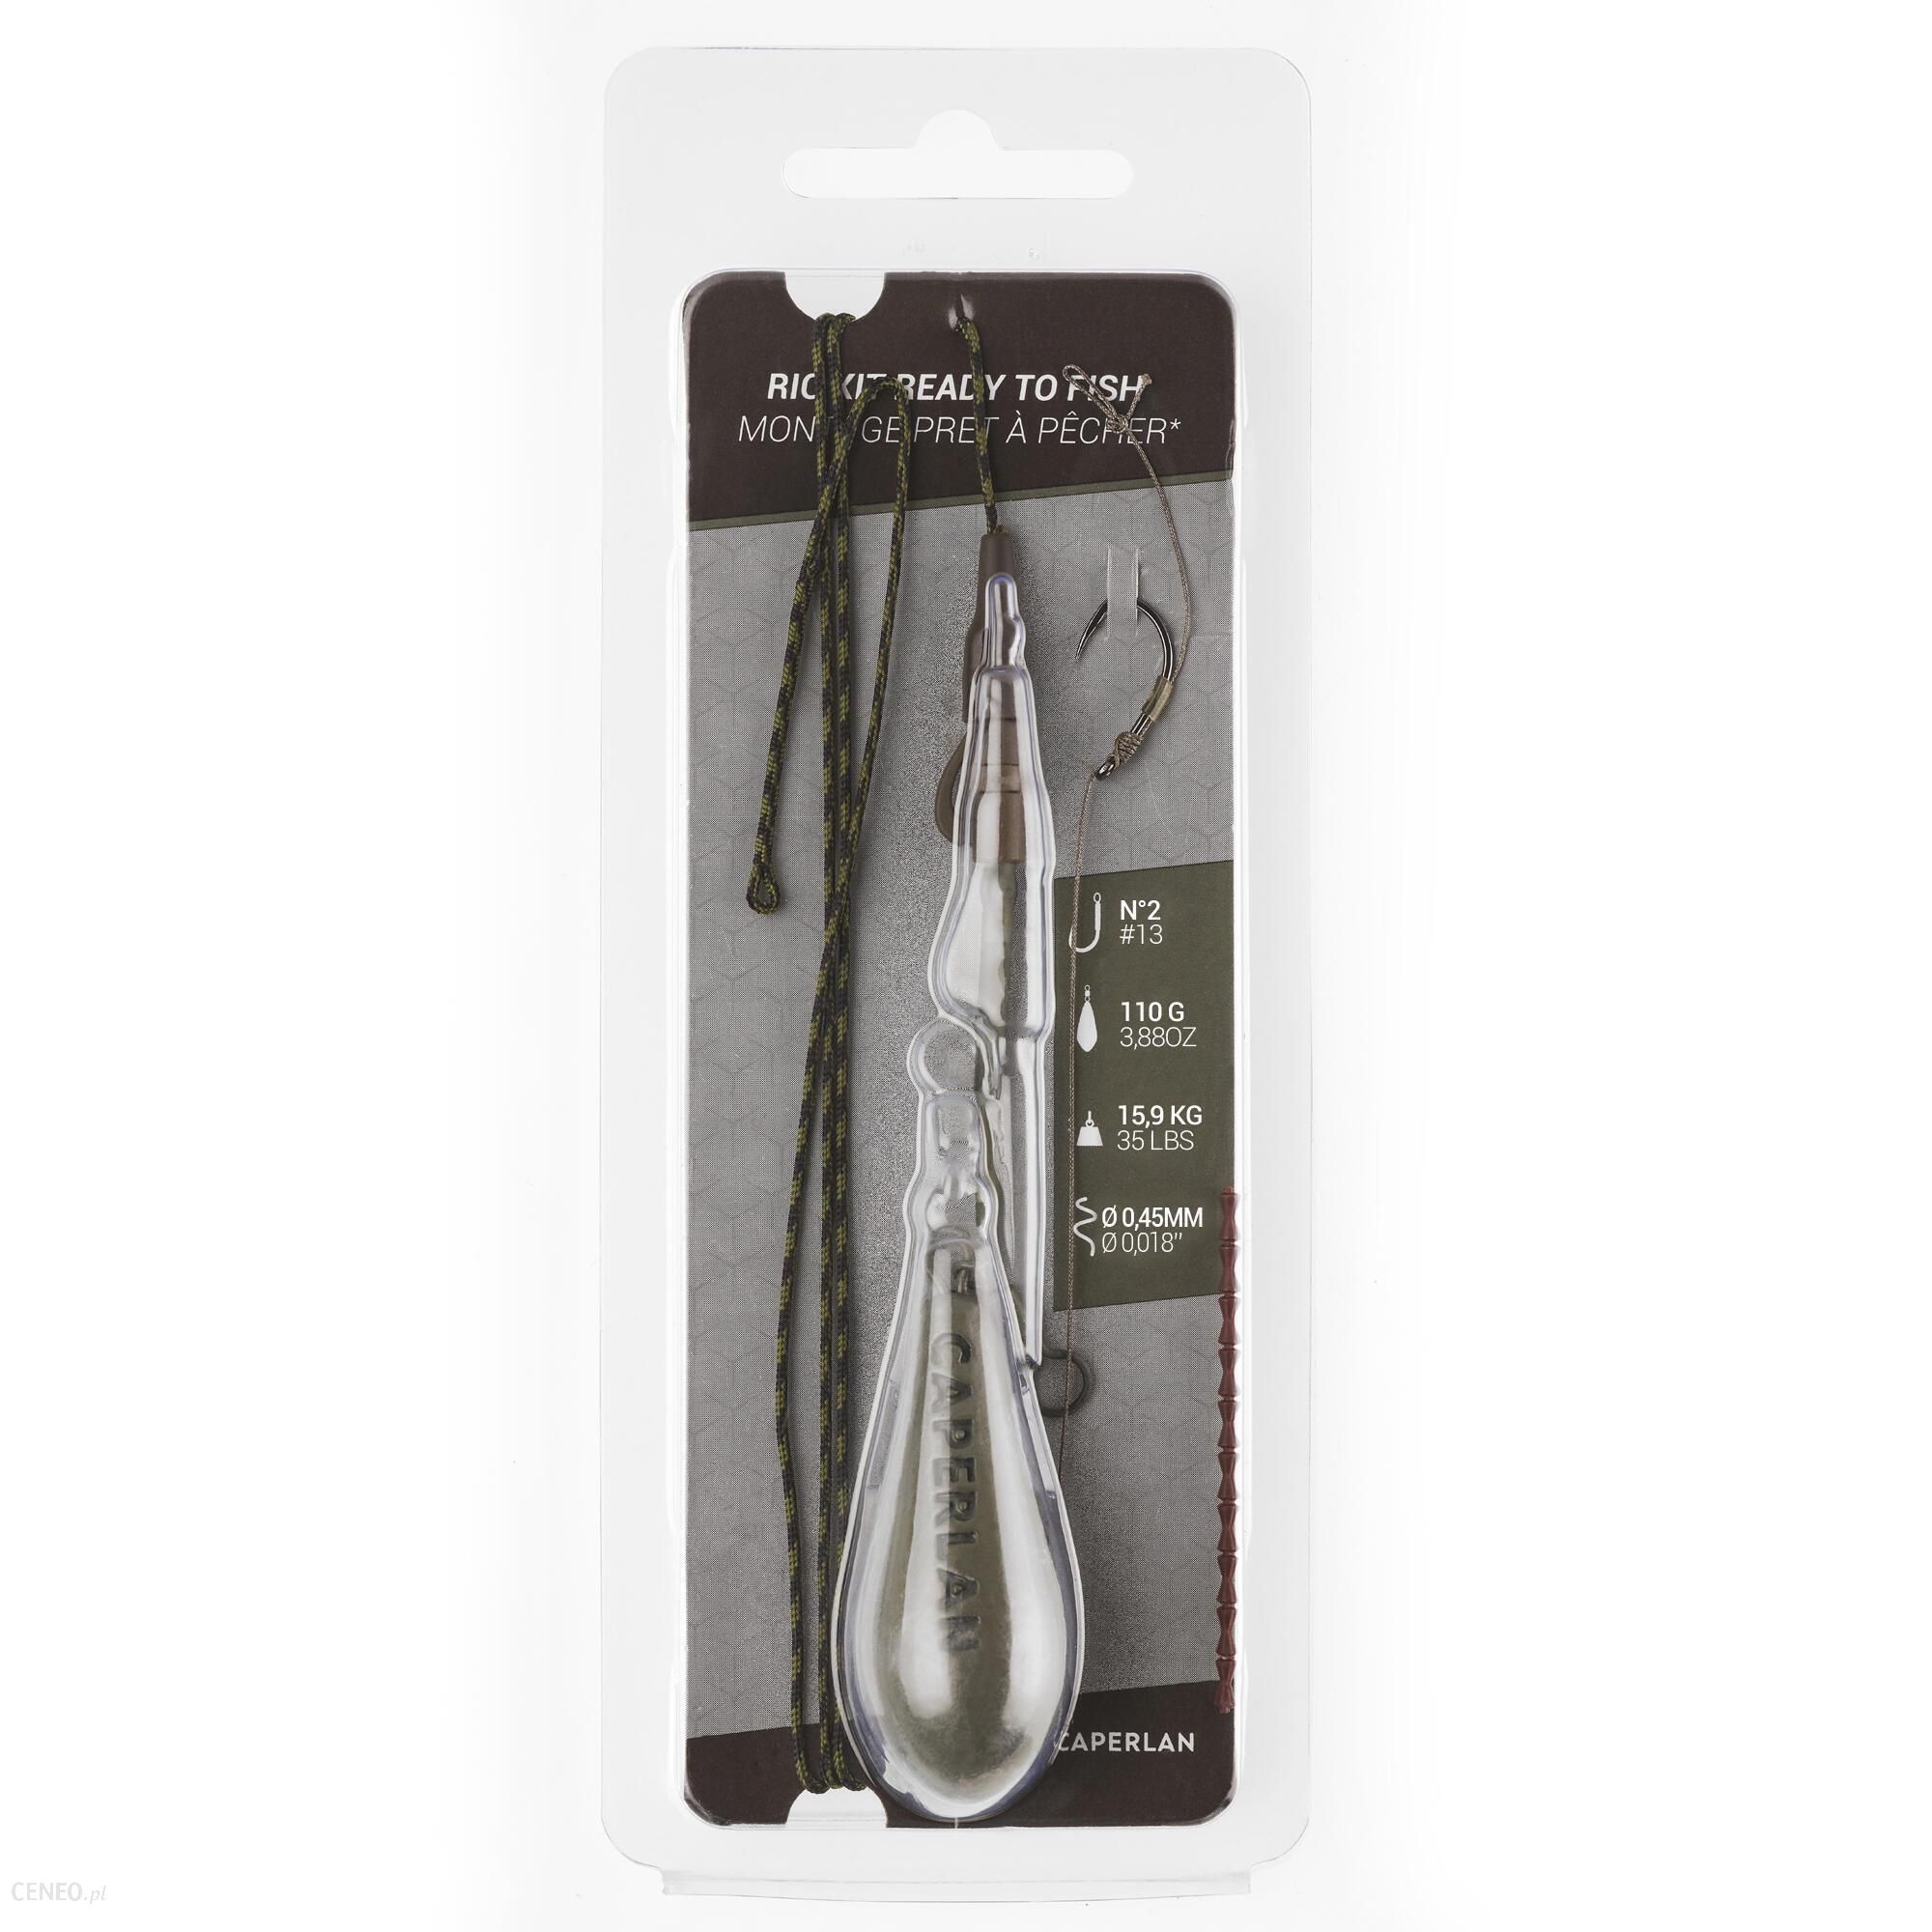 Caperlan Zestaw Rig Clip Ready To Fish 110g H2